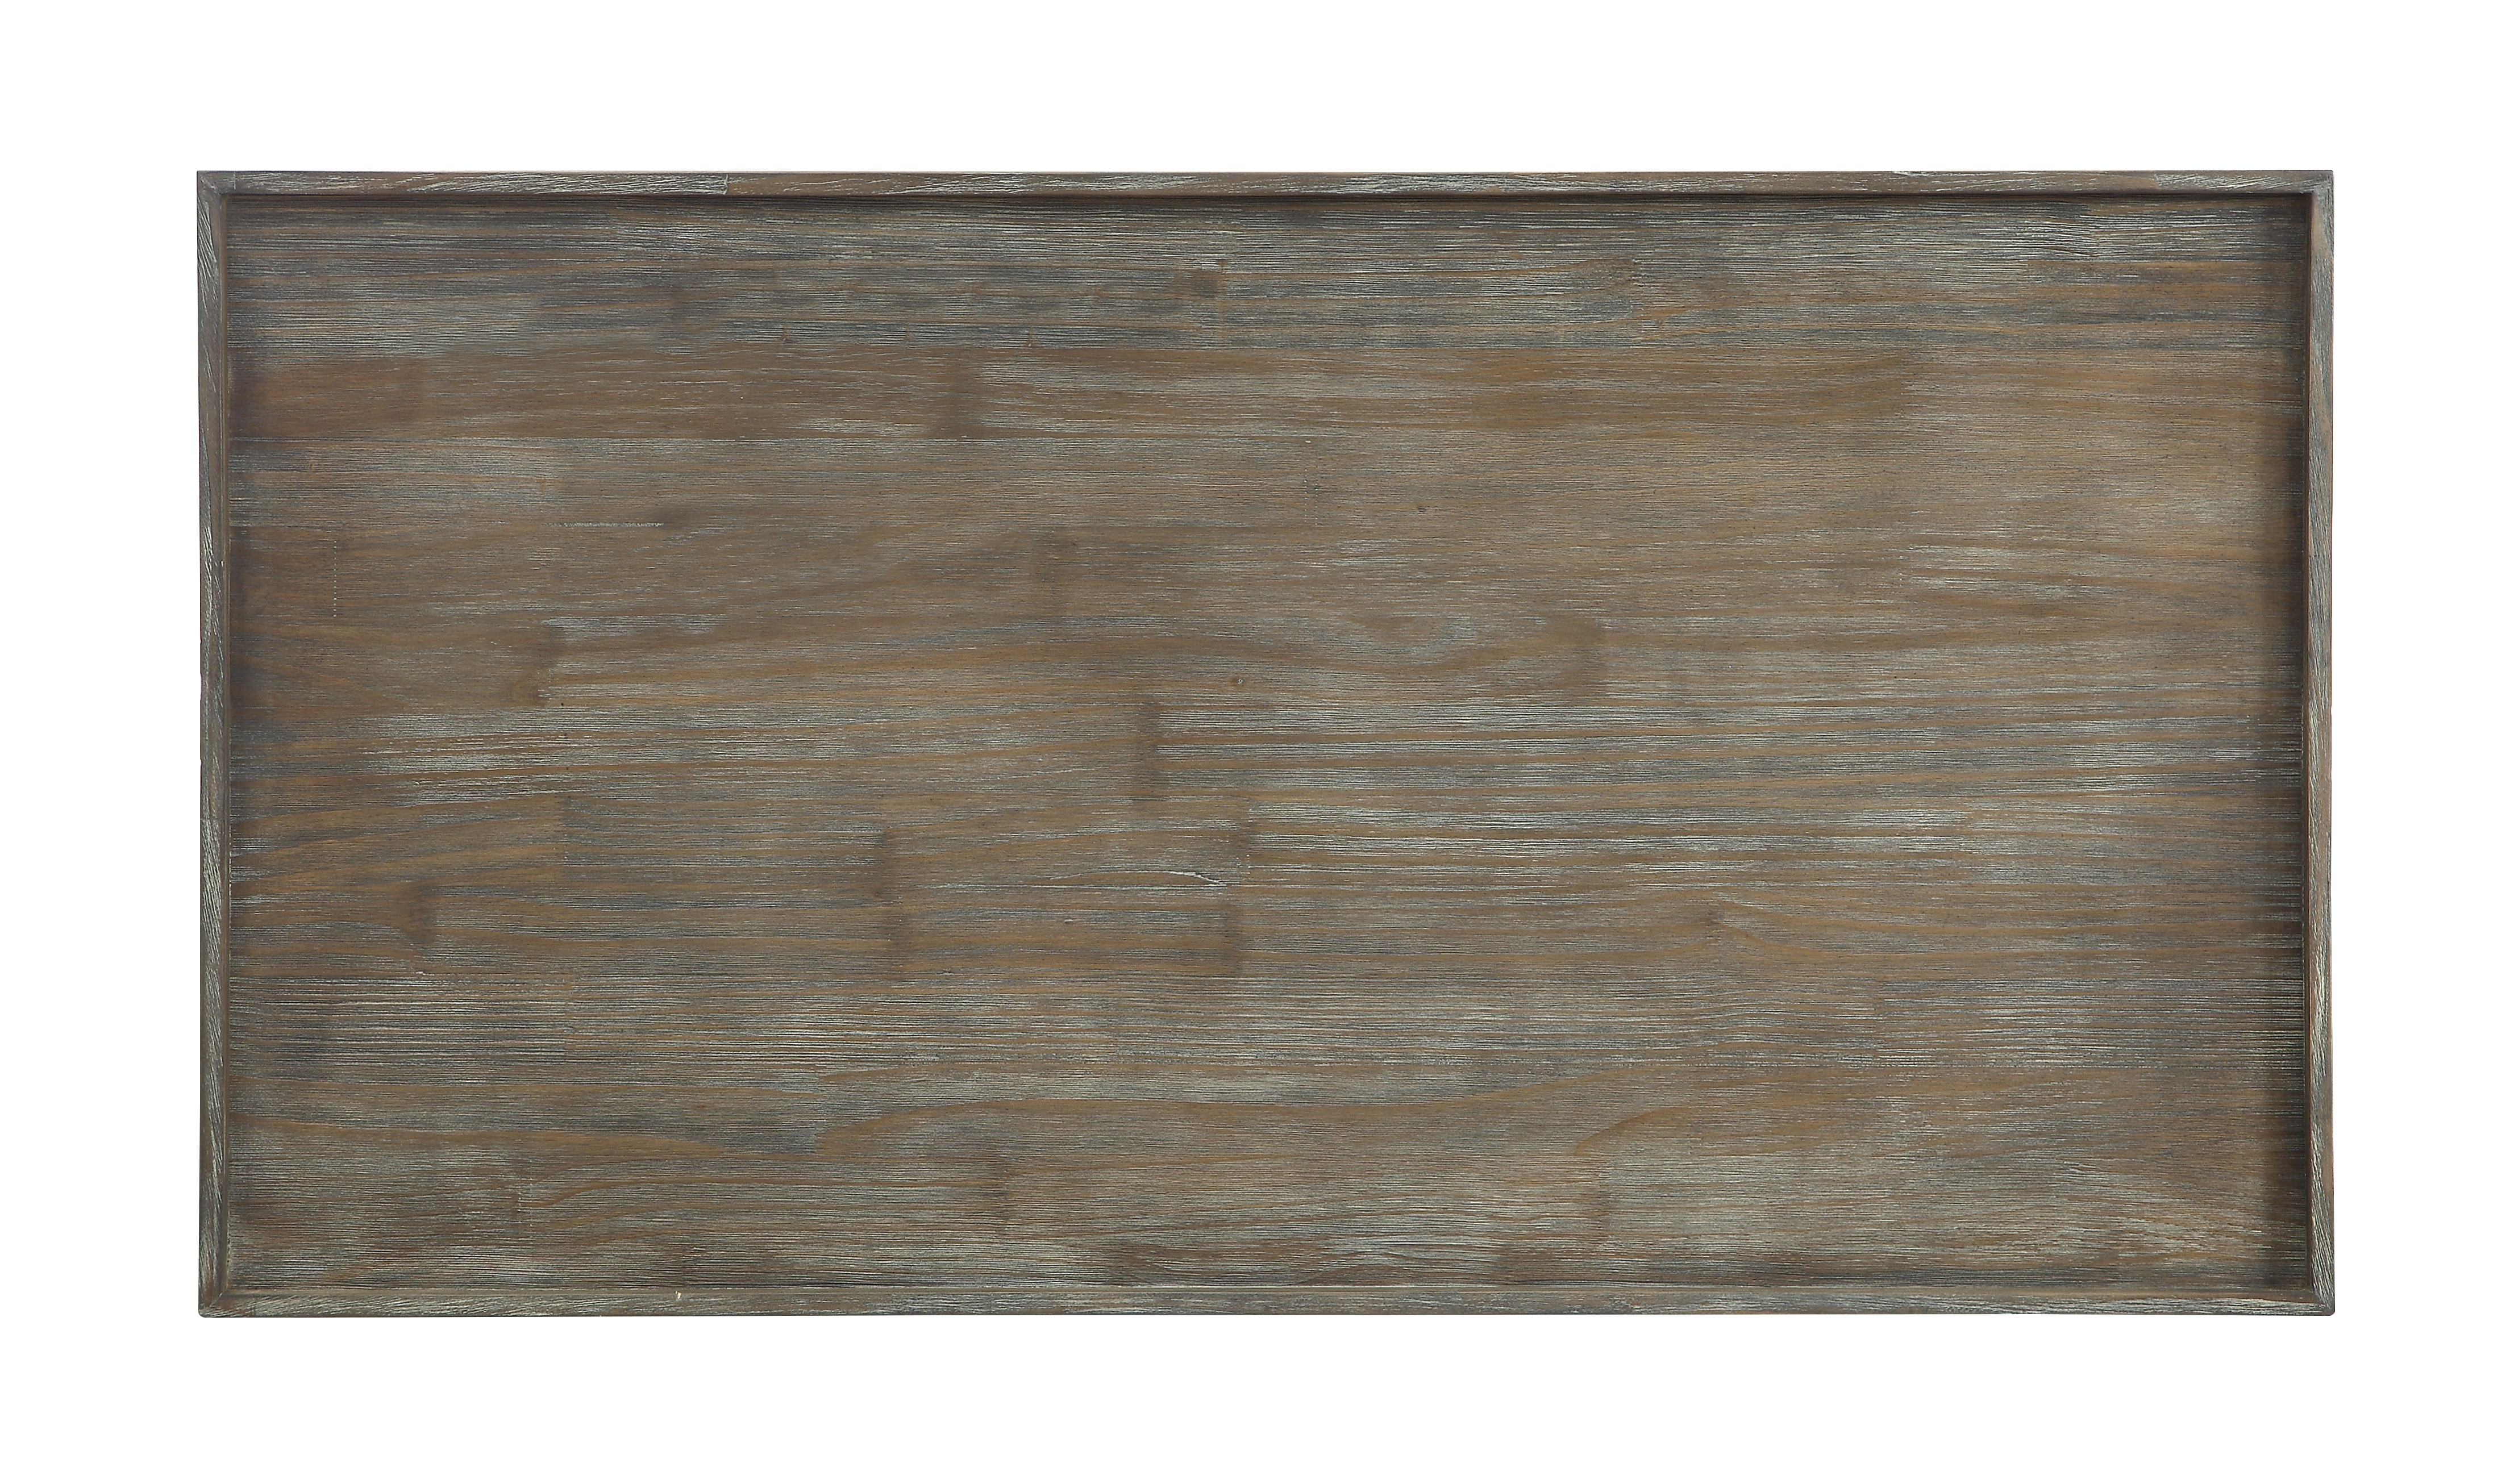 Biscayne Cocktail Table - Biscayne Weathered - Image 7